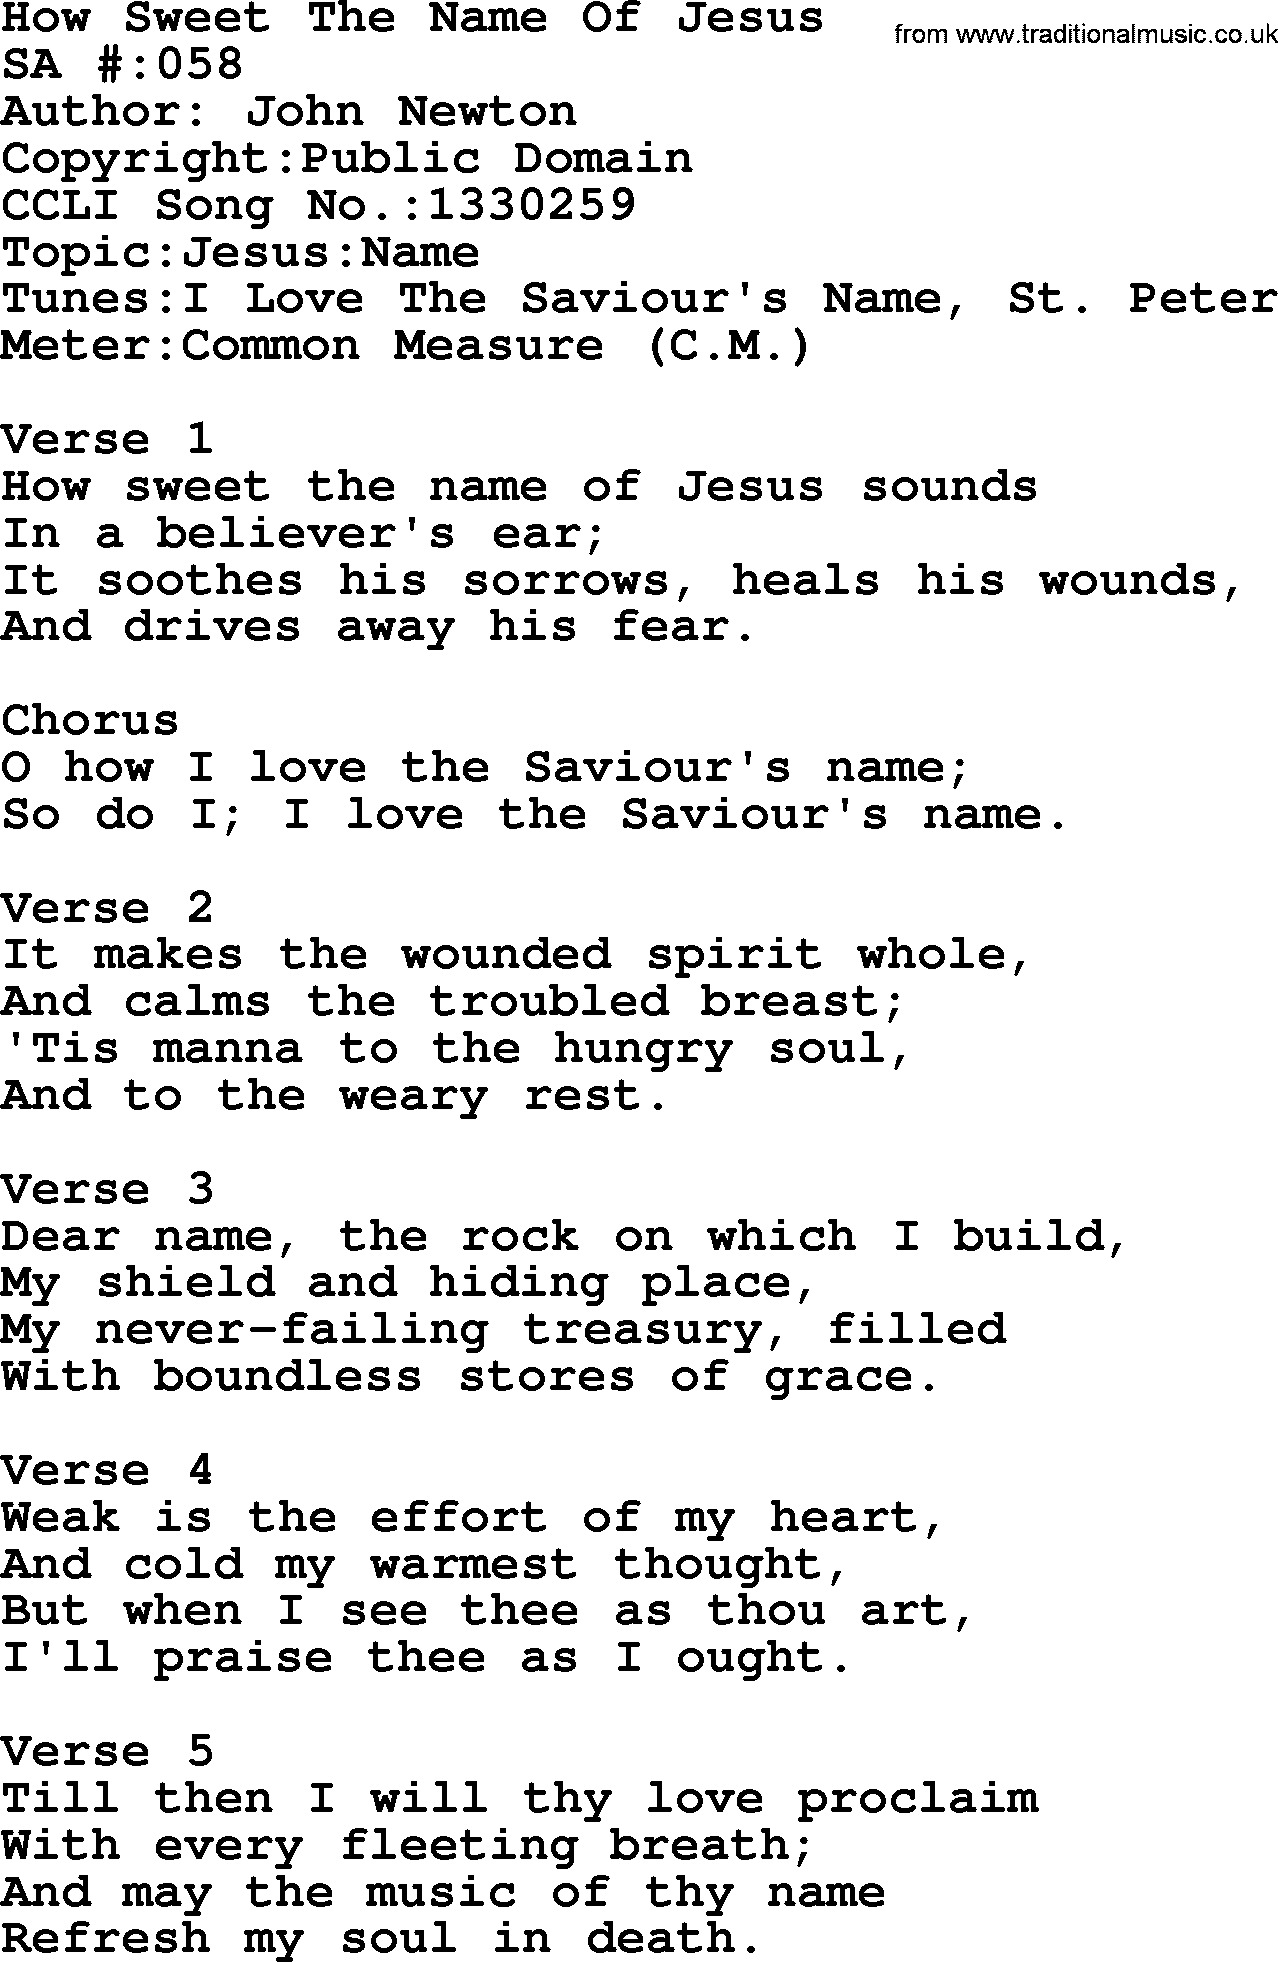 Salvation Army Hymnal, title: How Sweet The Name Of Jesus, with lyrics and PDF,